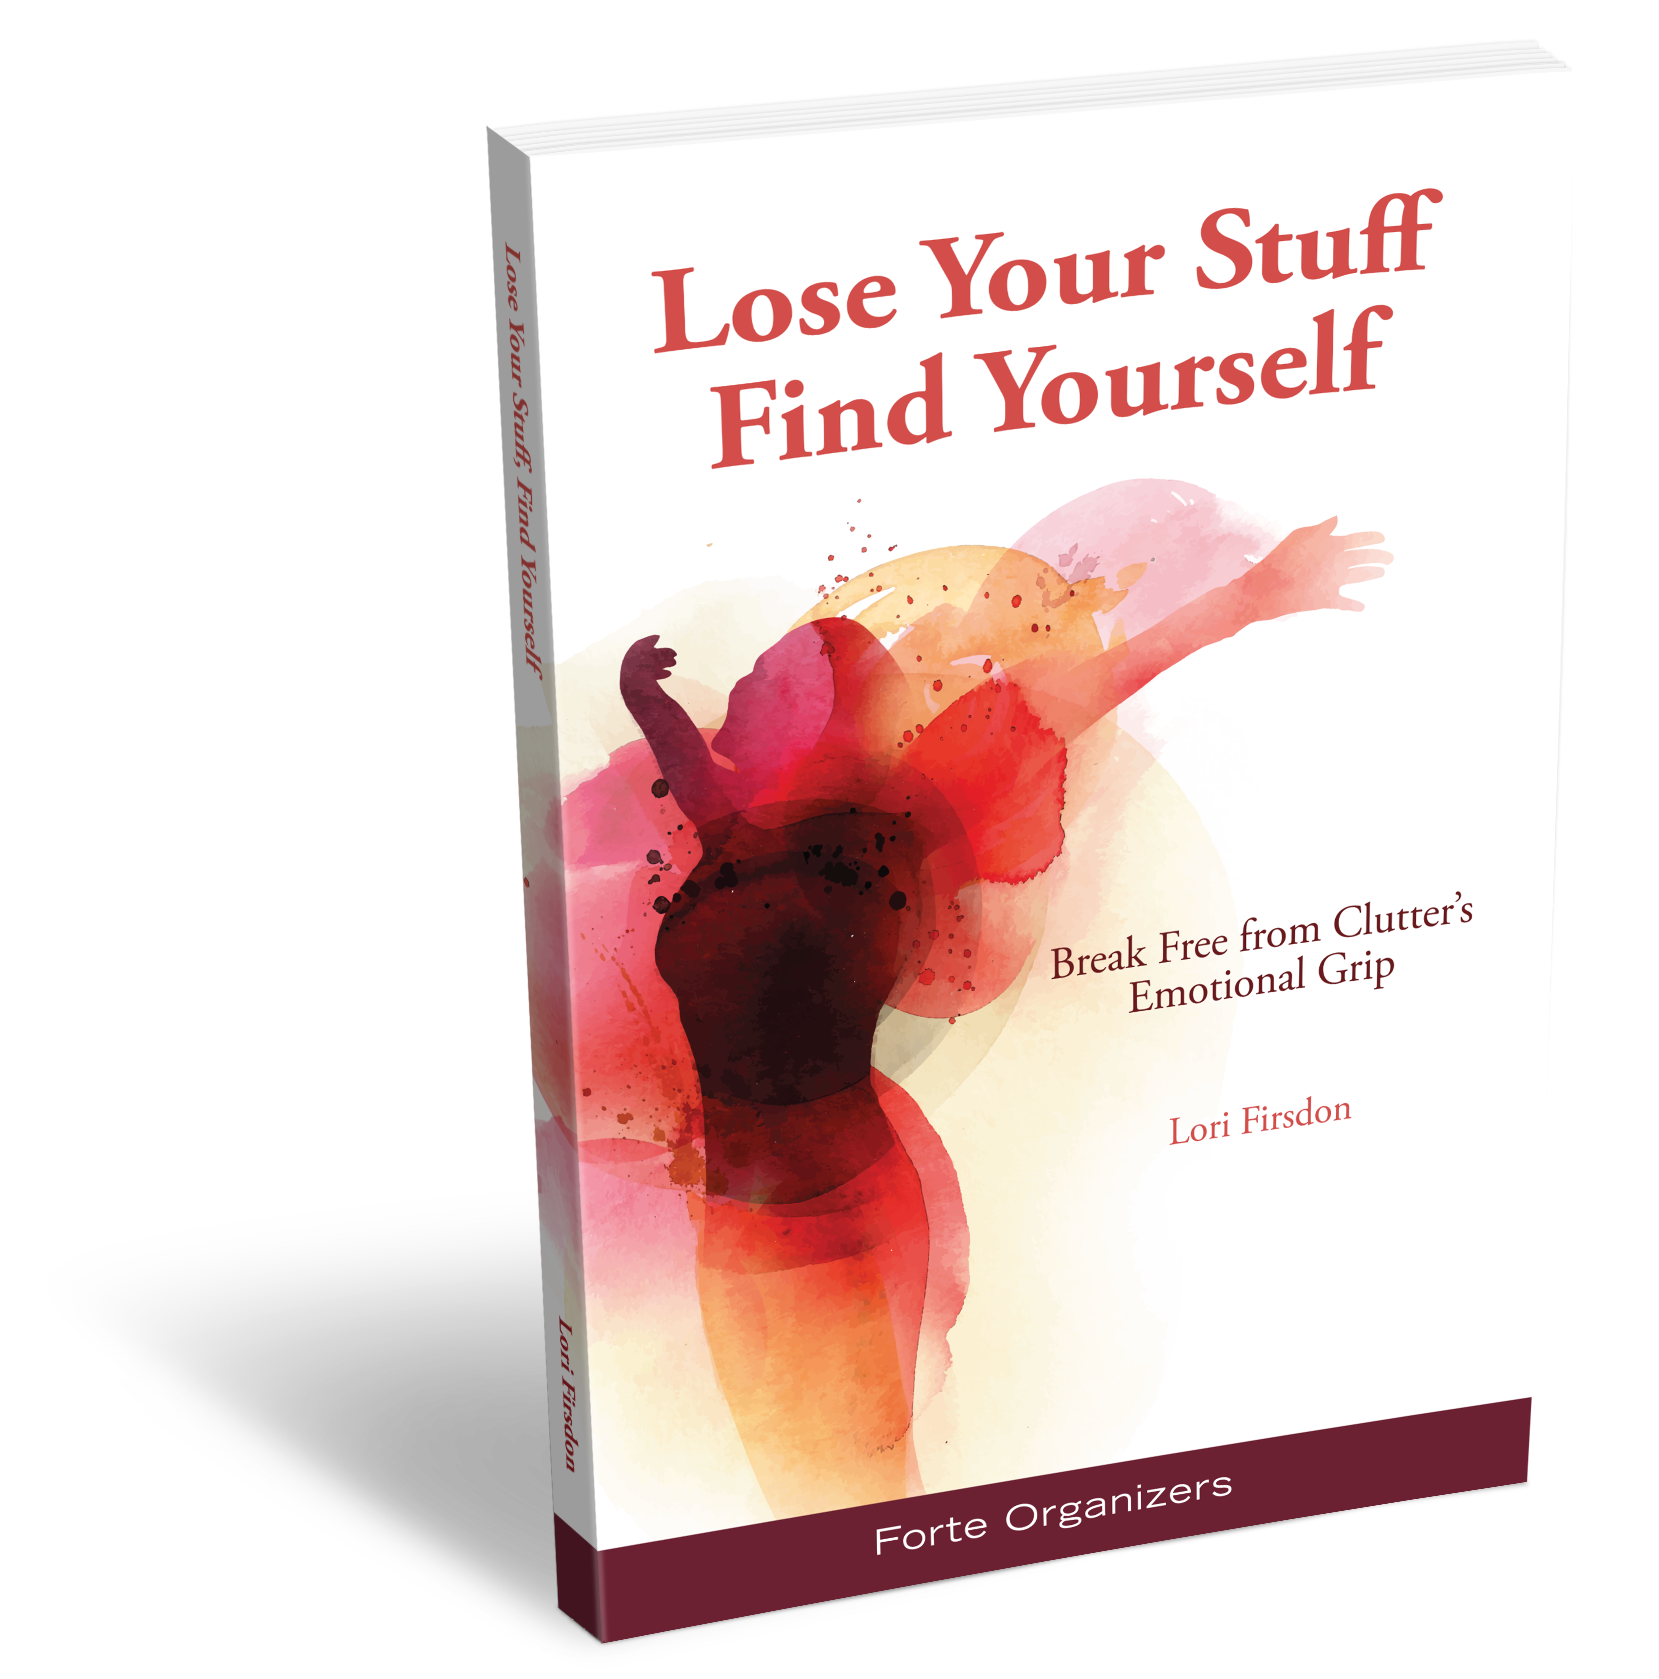 Lose Your Stuff, Find Yourself